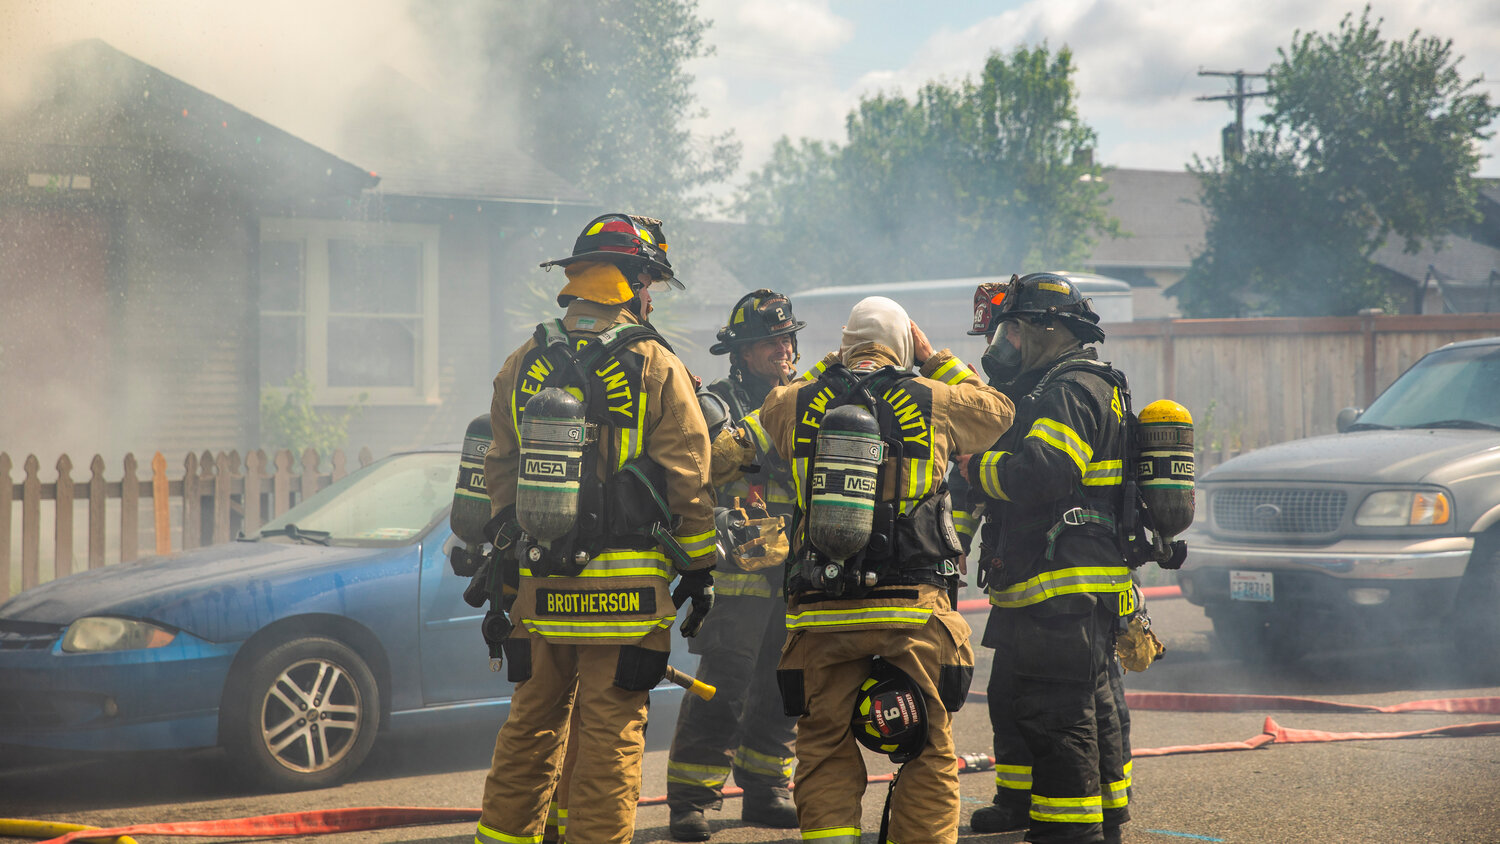 Lewis County and Riverside firefighters organize as they work to put out flames at a residence in the 800 block of Centralia College Blvd. on Wednesday, May 24.